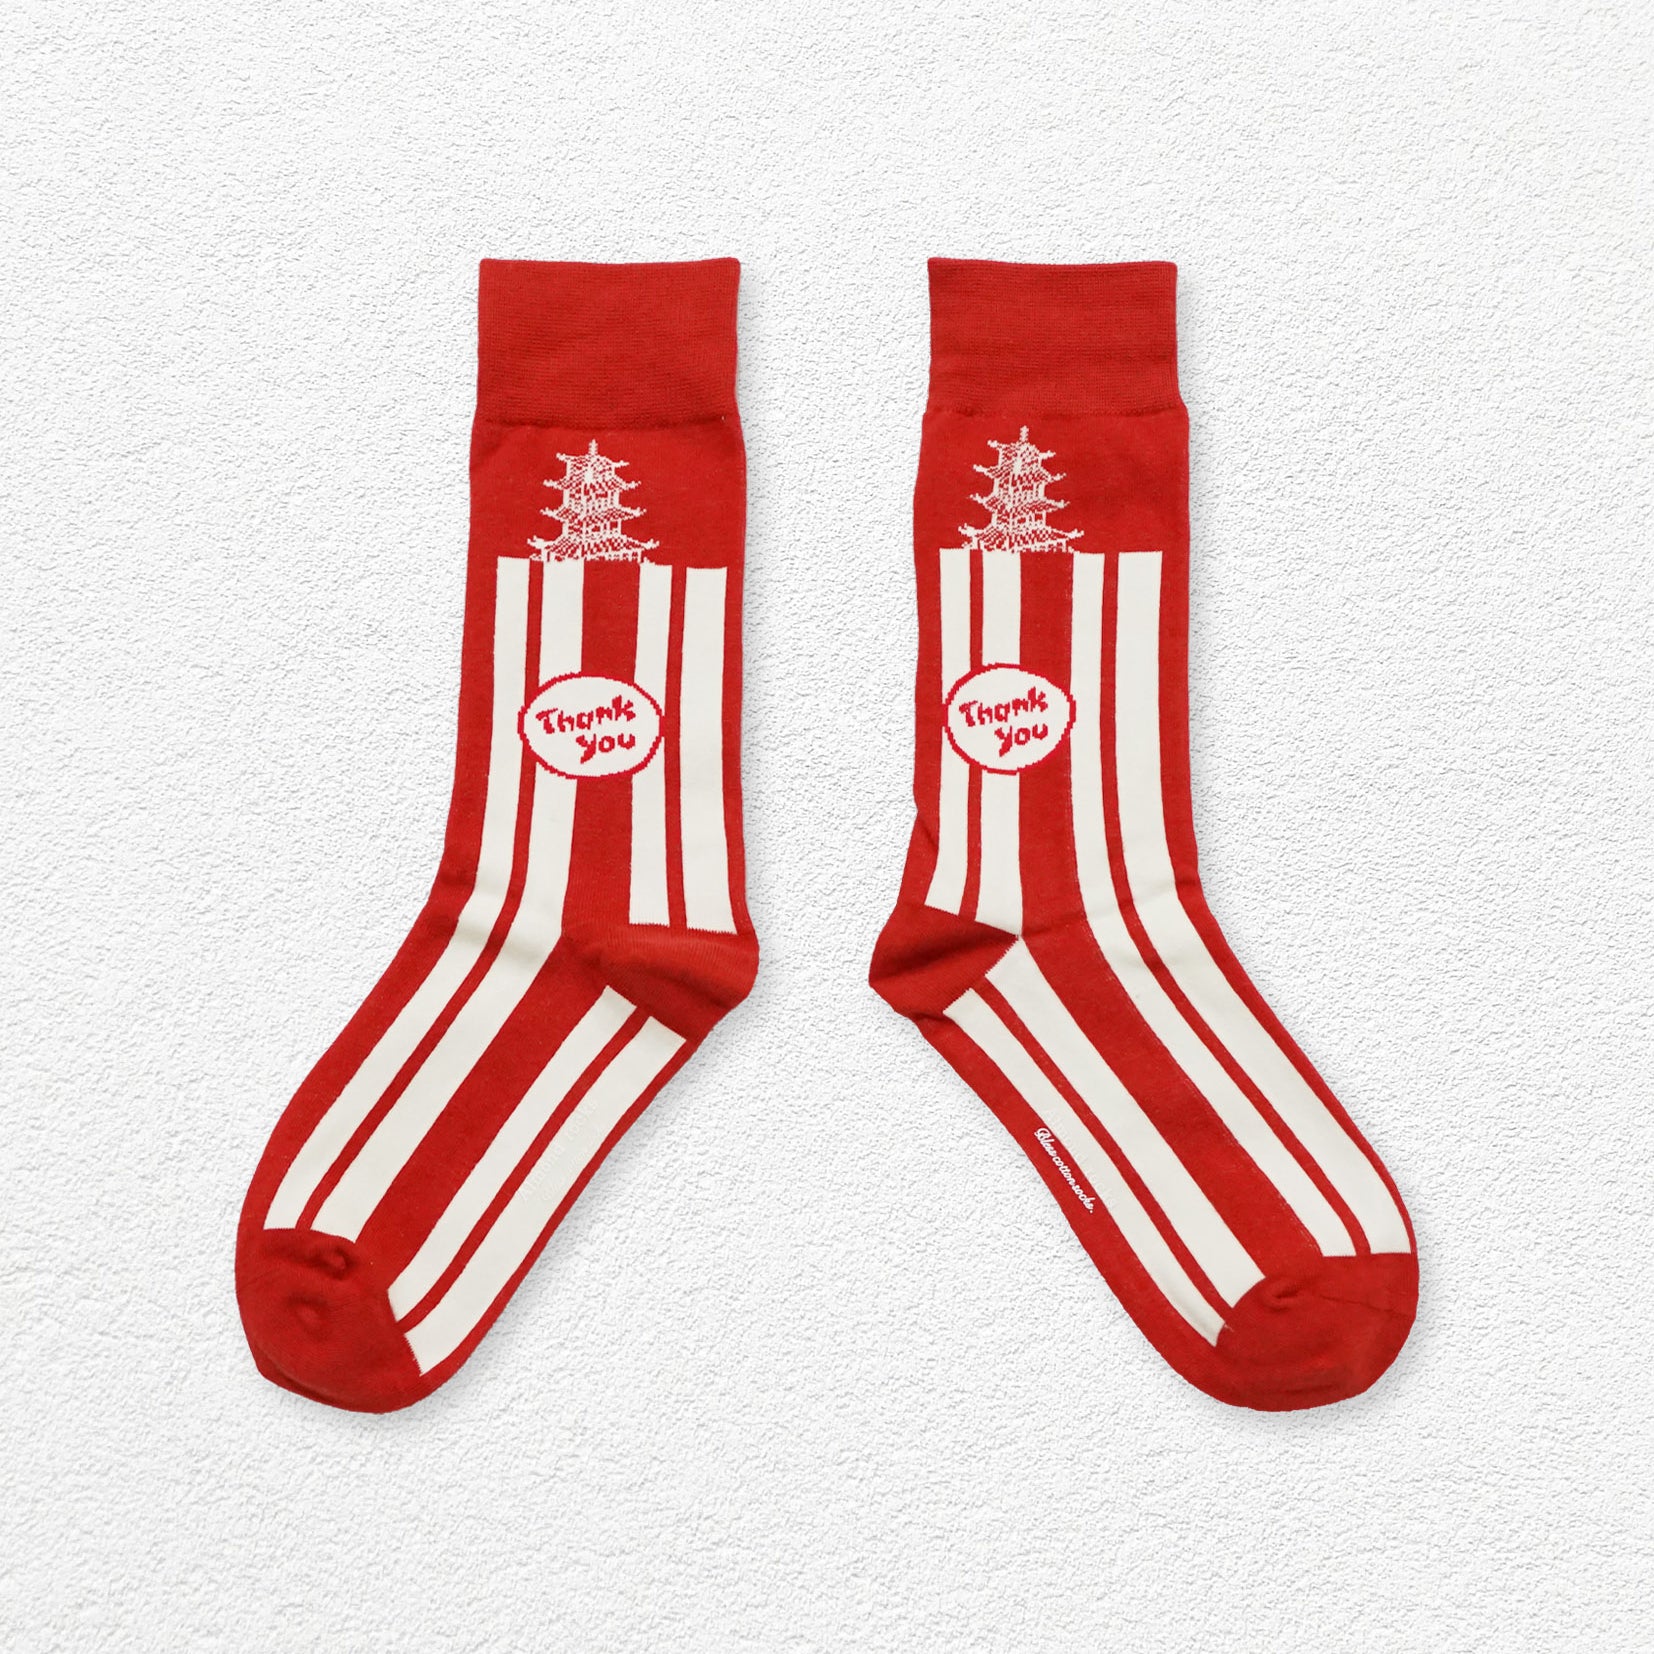 'Thank you' Chinese takeaway mid-calf sock - red